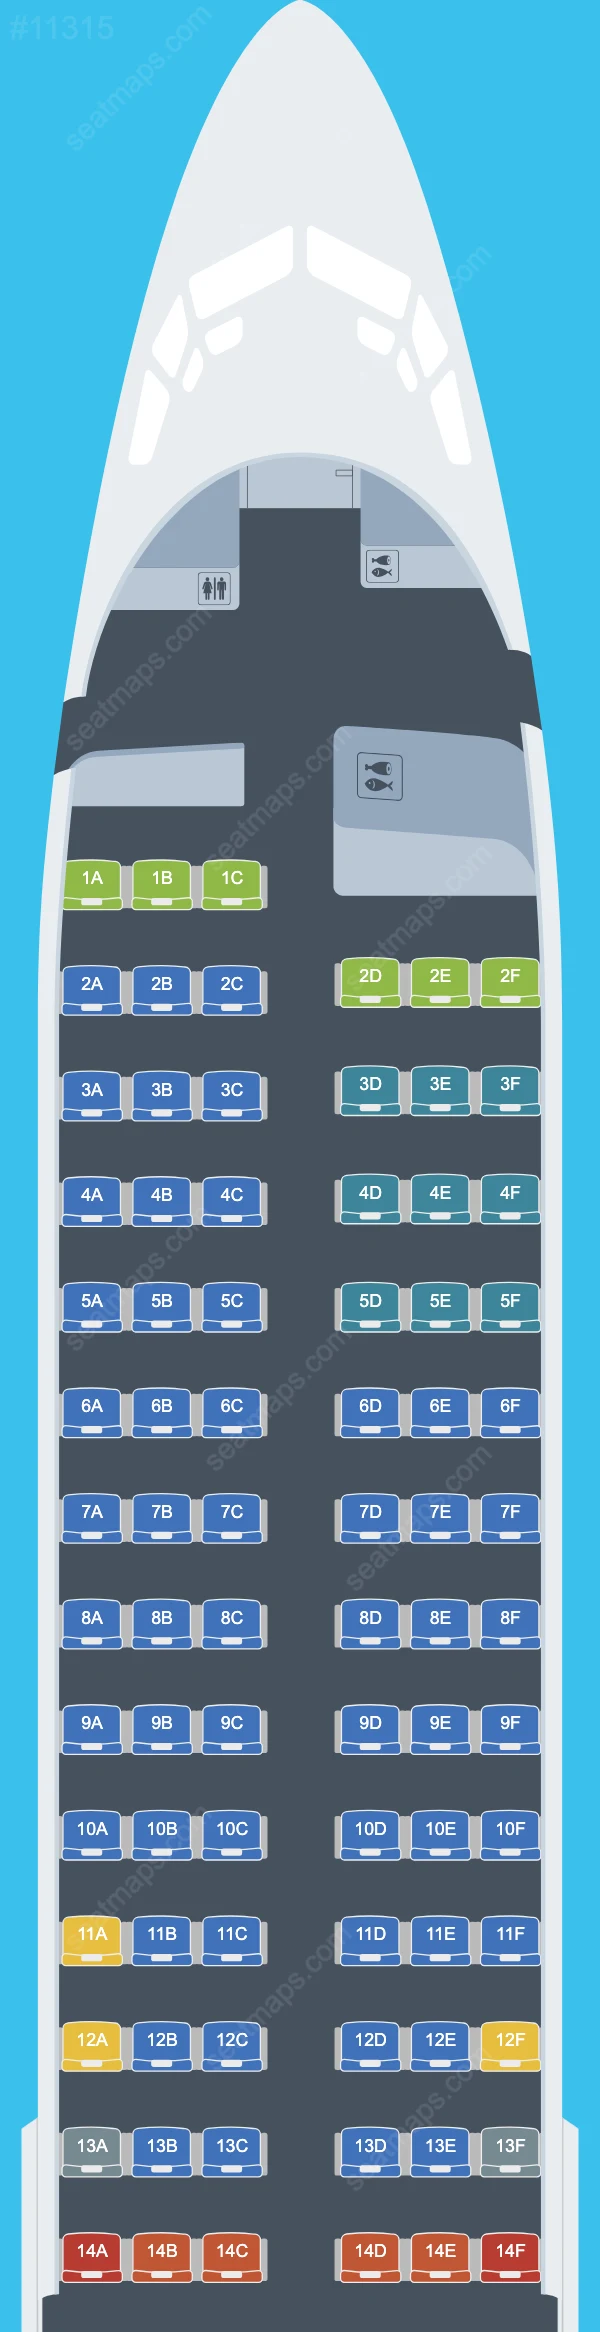 Jettime Boeing 737 aircraft seat map  737-800